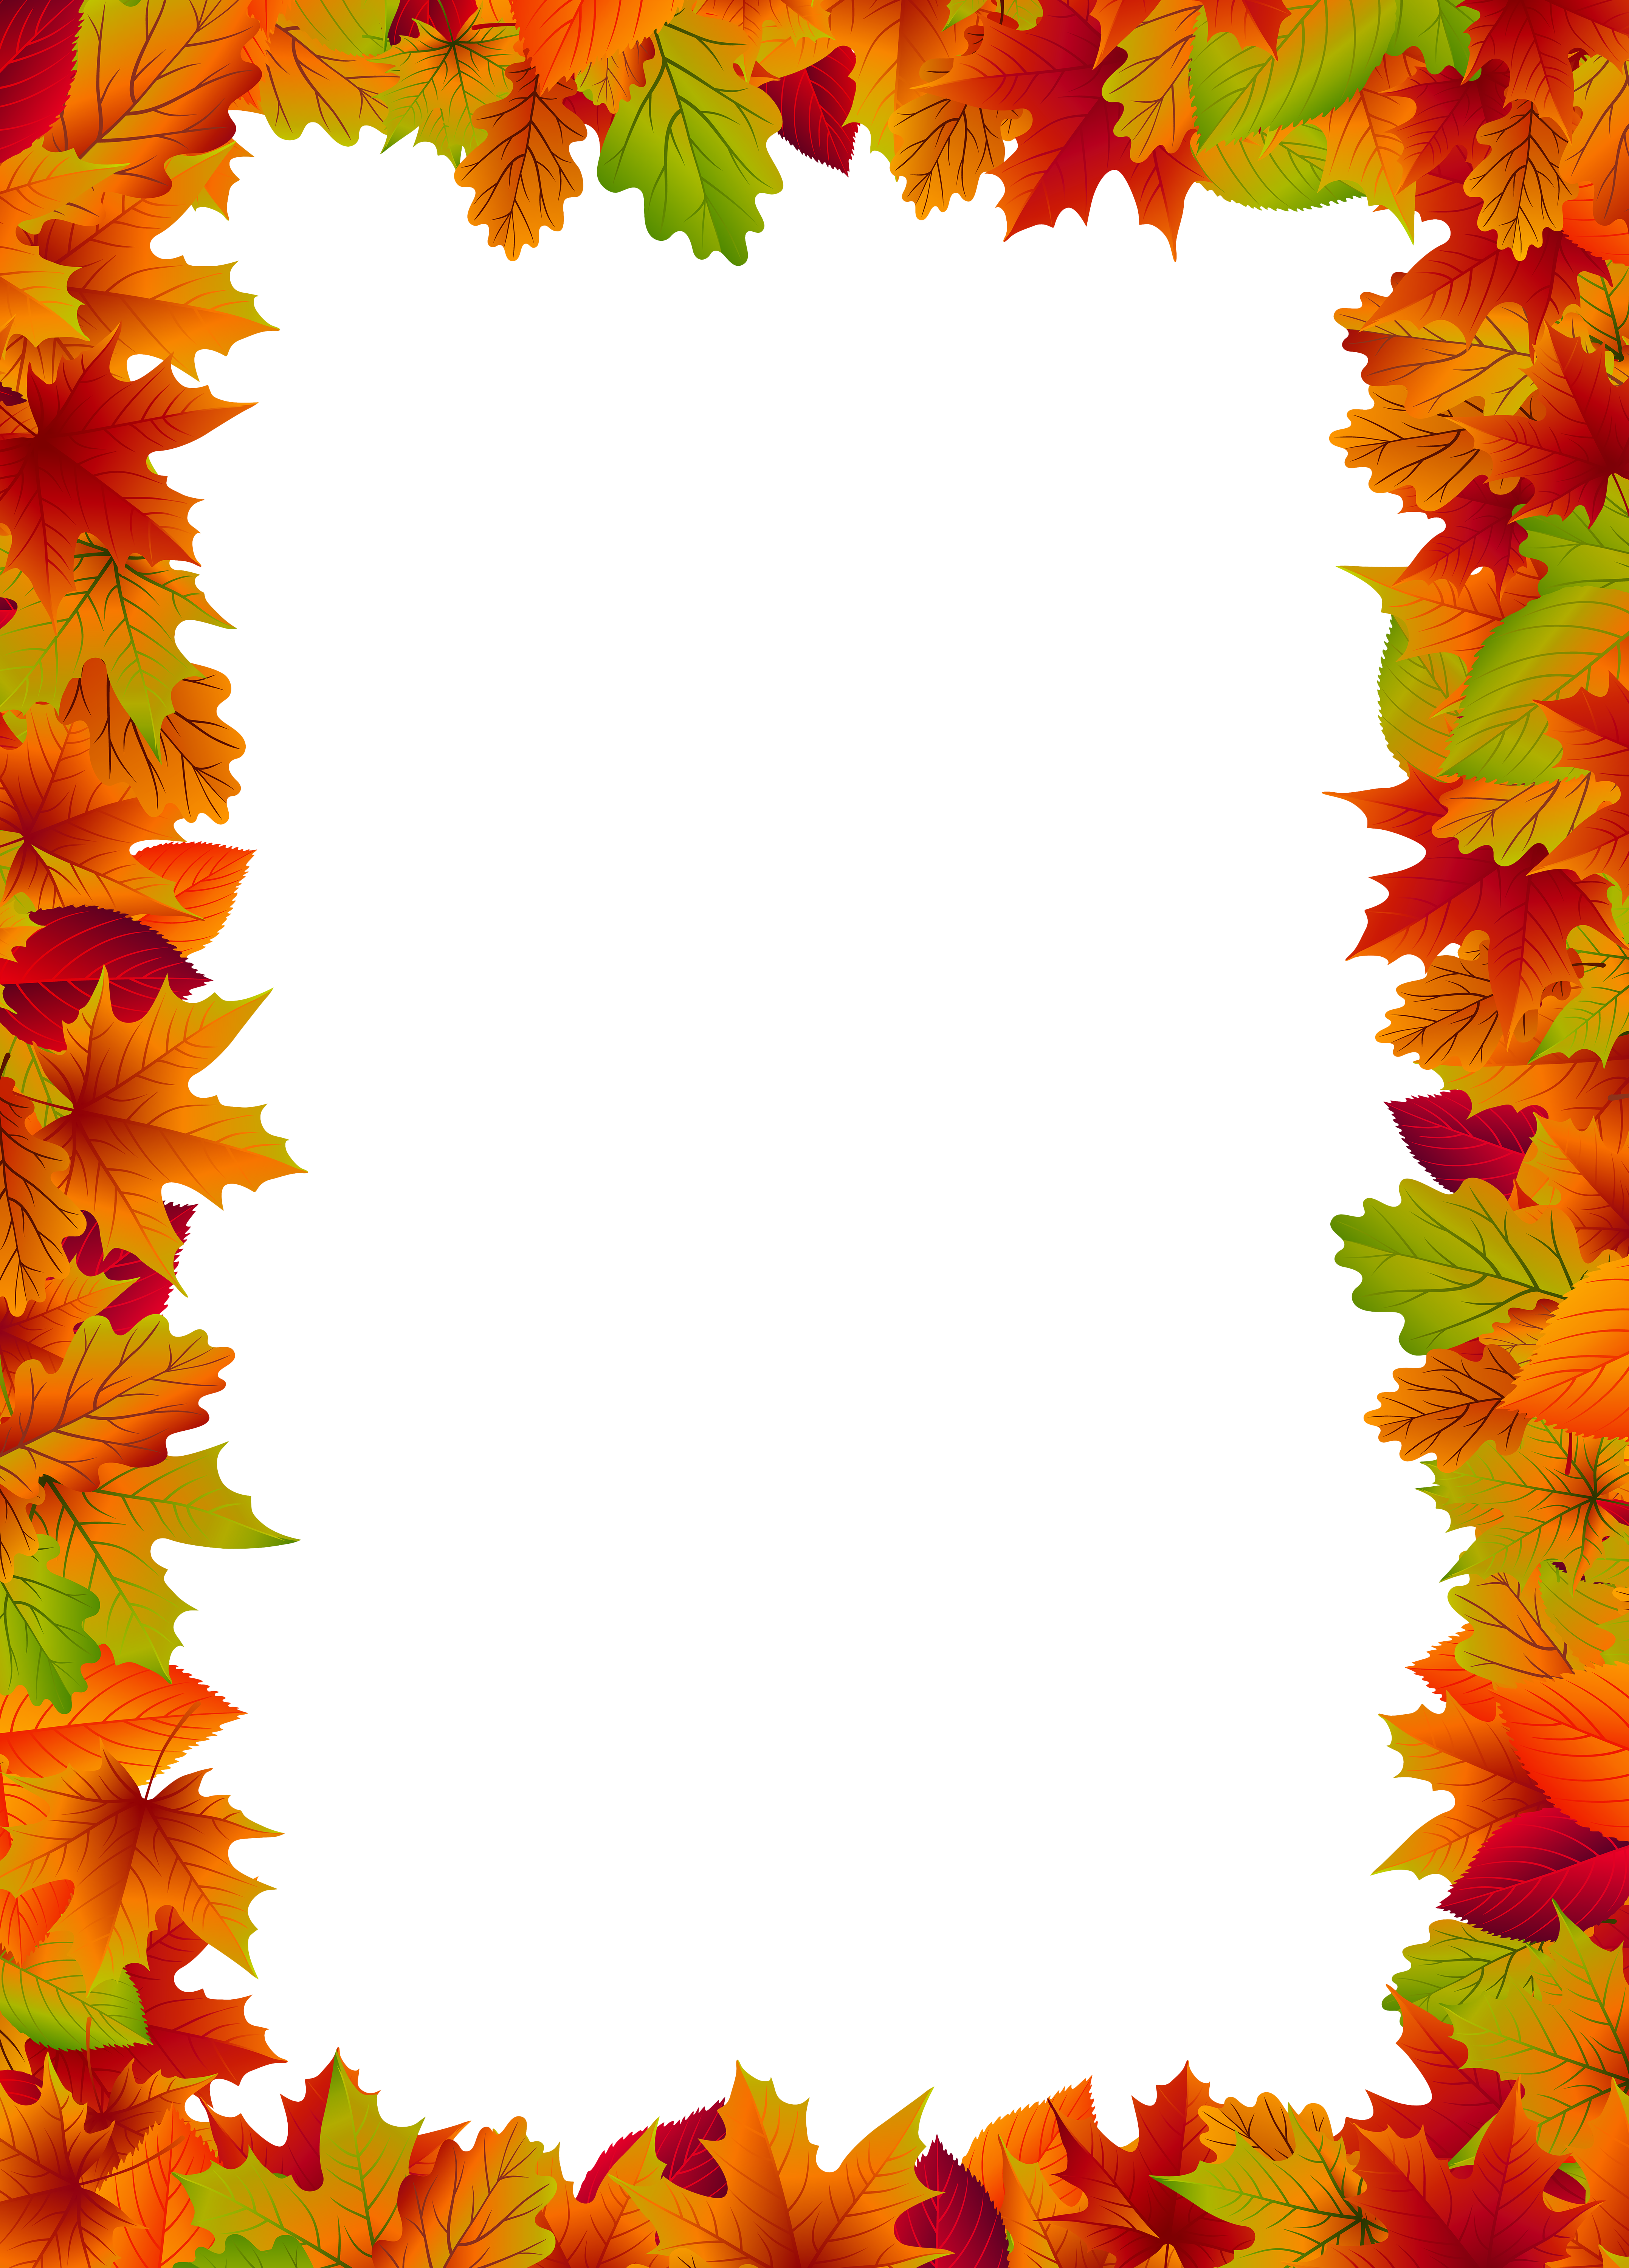 Free Fall Border Cliparts, Download Free Clip Art, Free Clip Art on